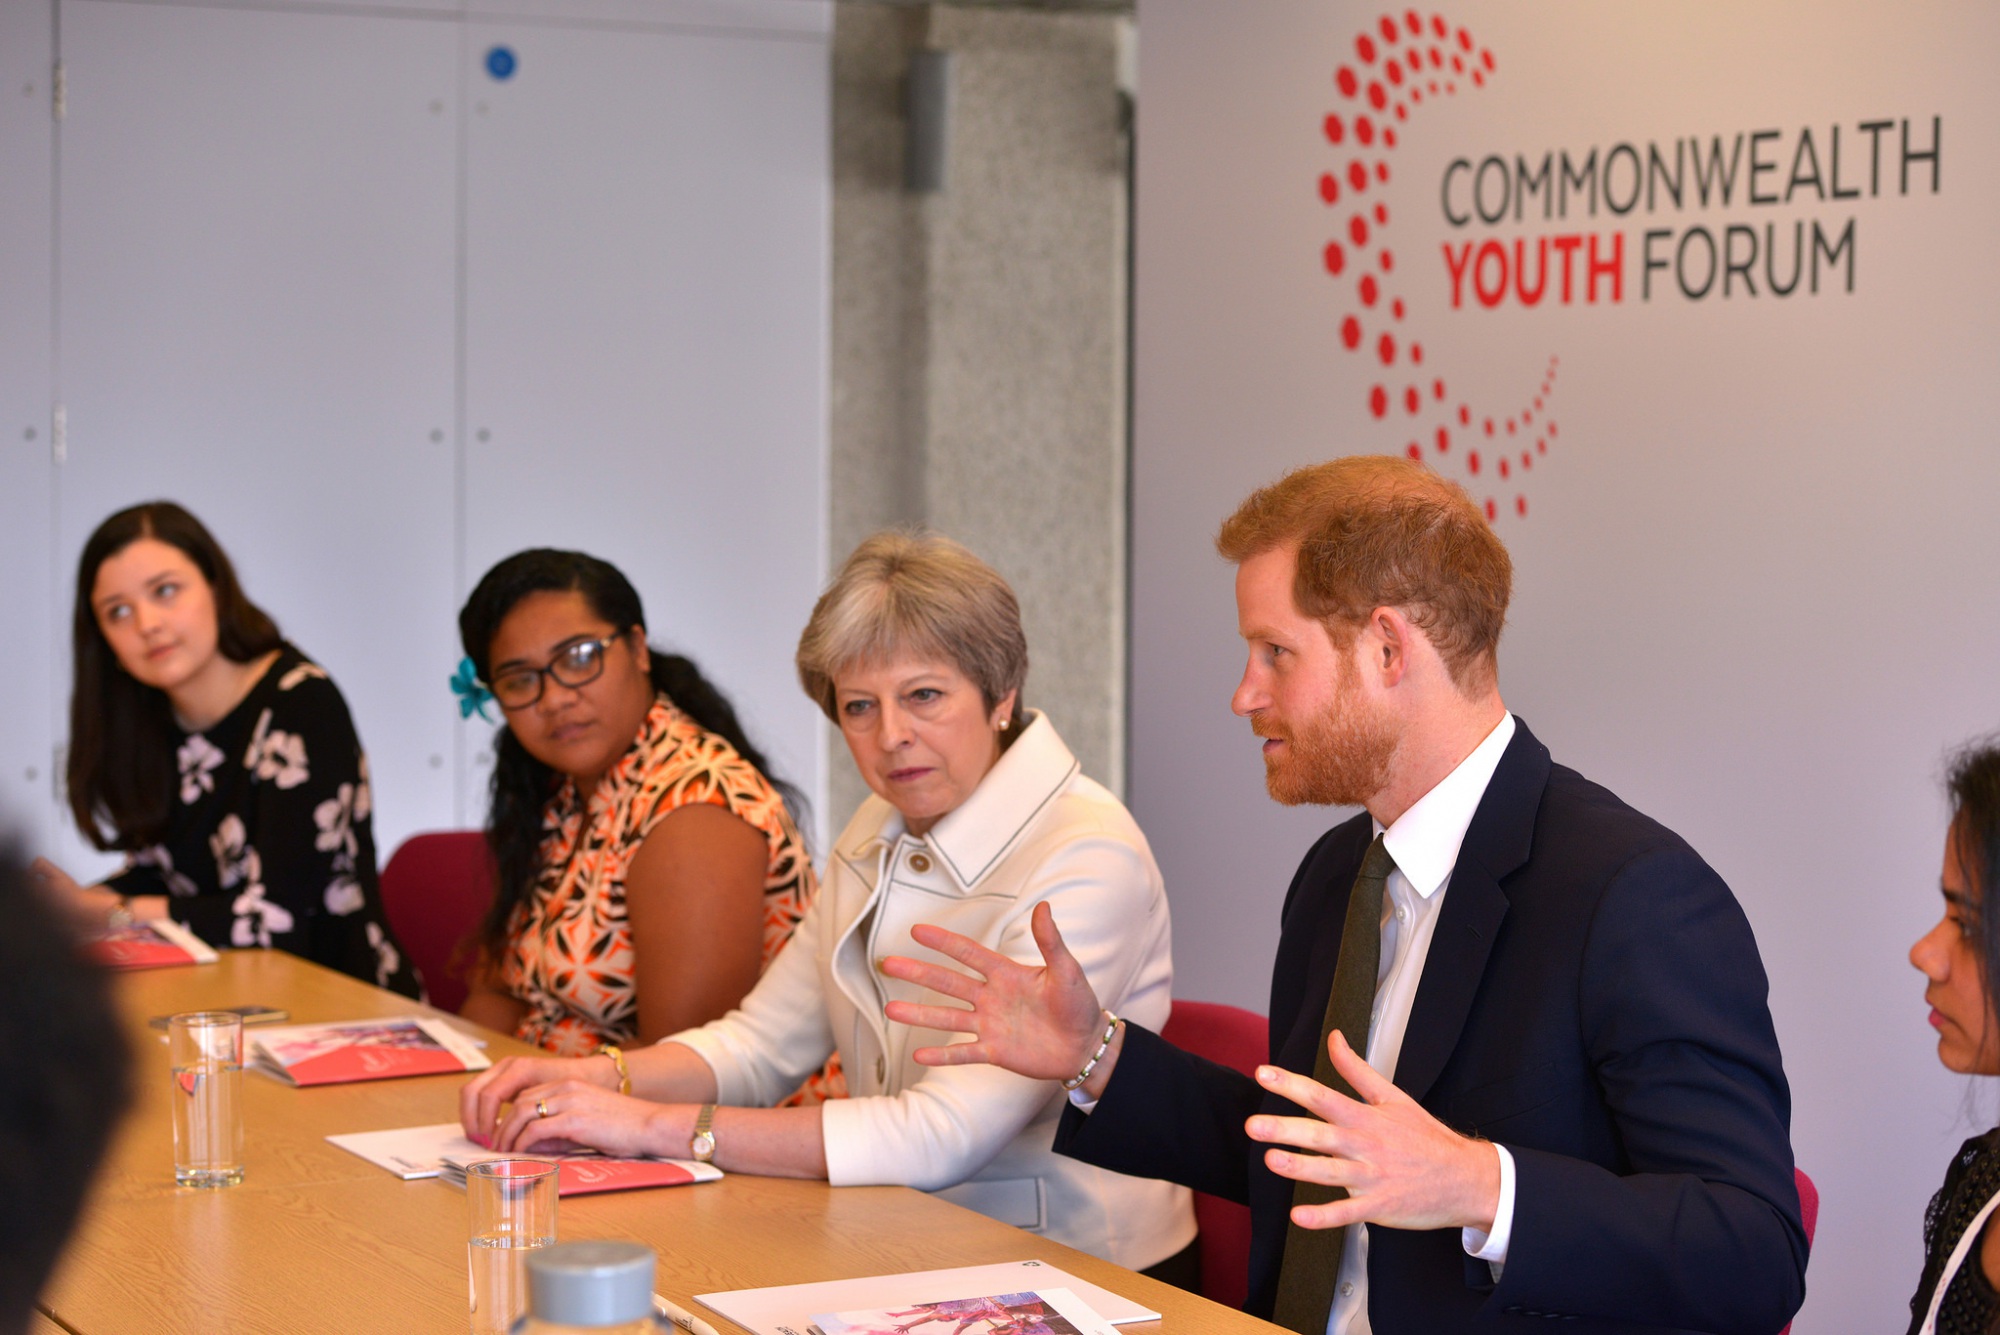 Prince Harry And Theresa May At Commonwealth Youth Forum 2018 In London